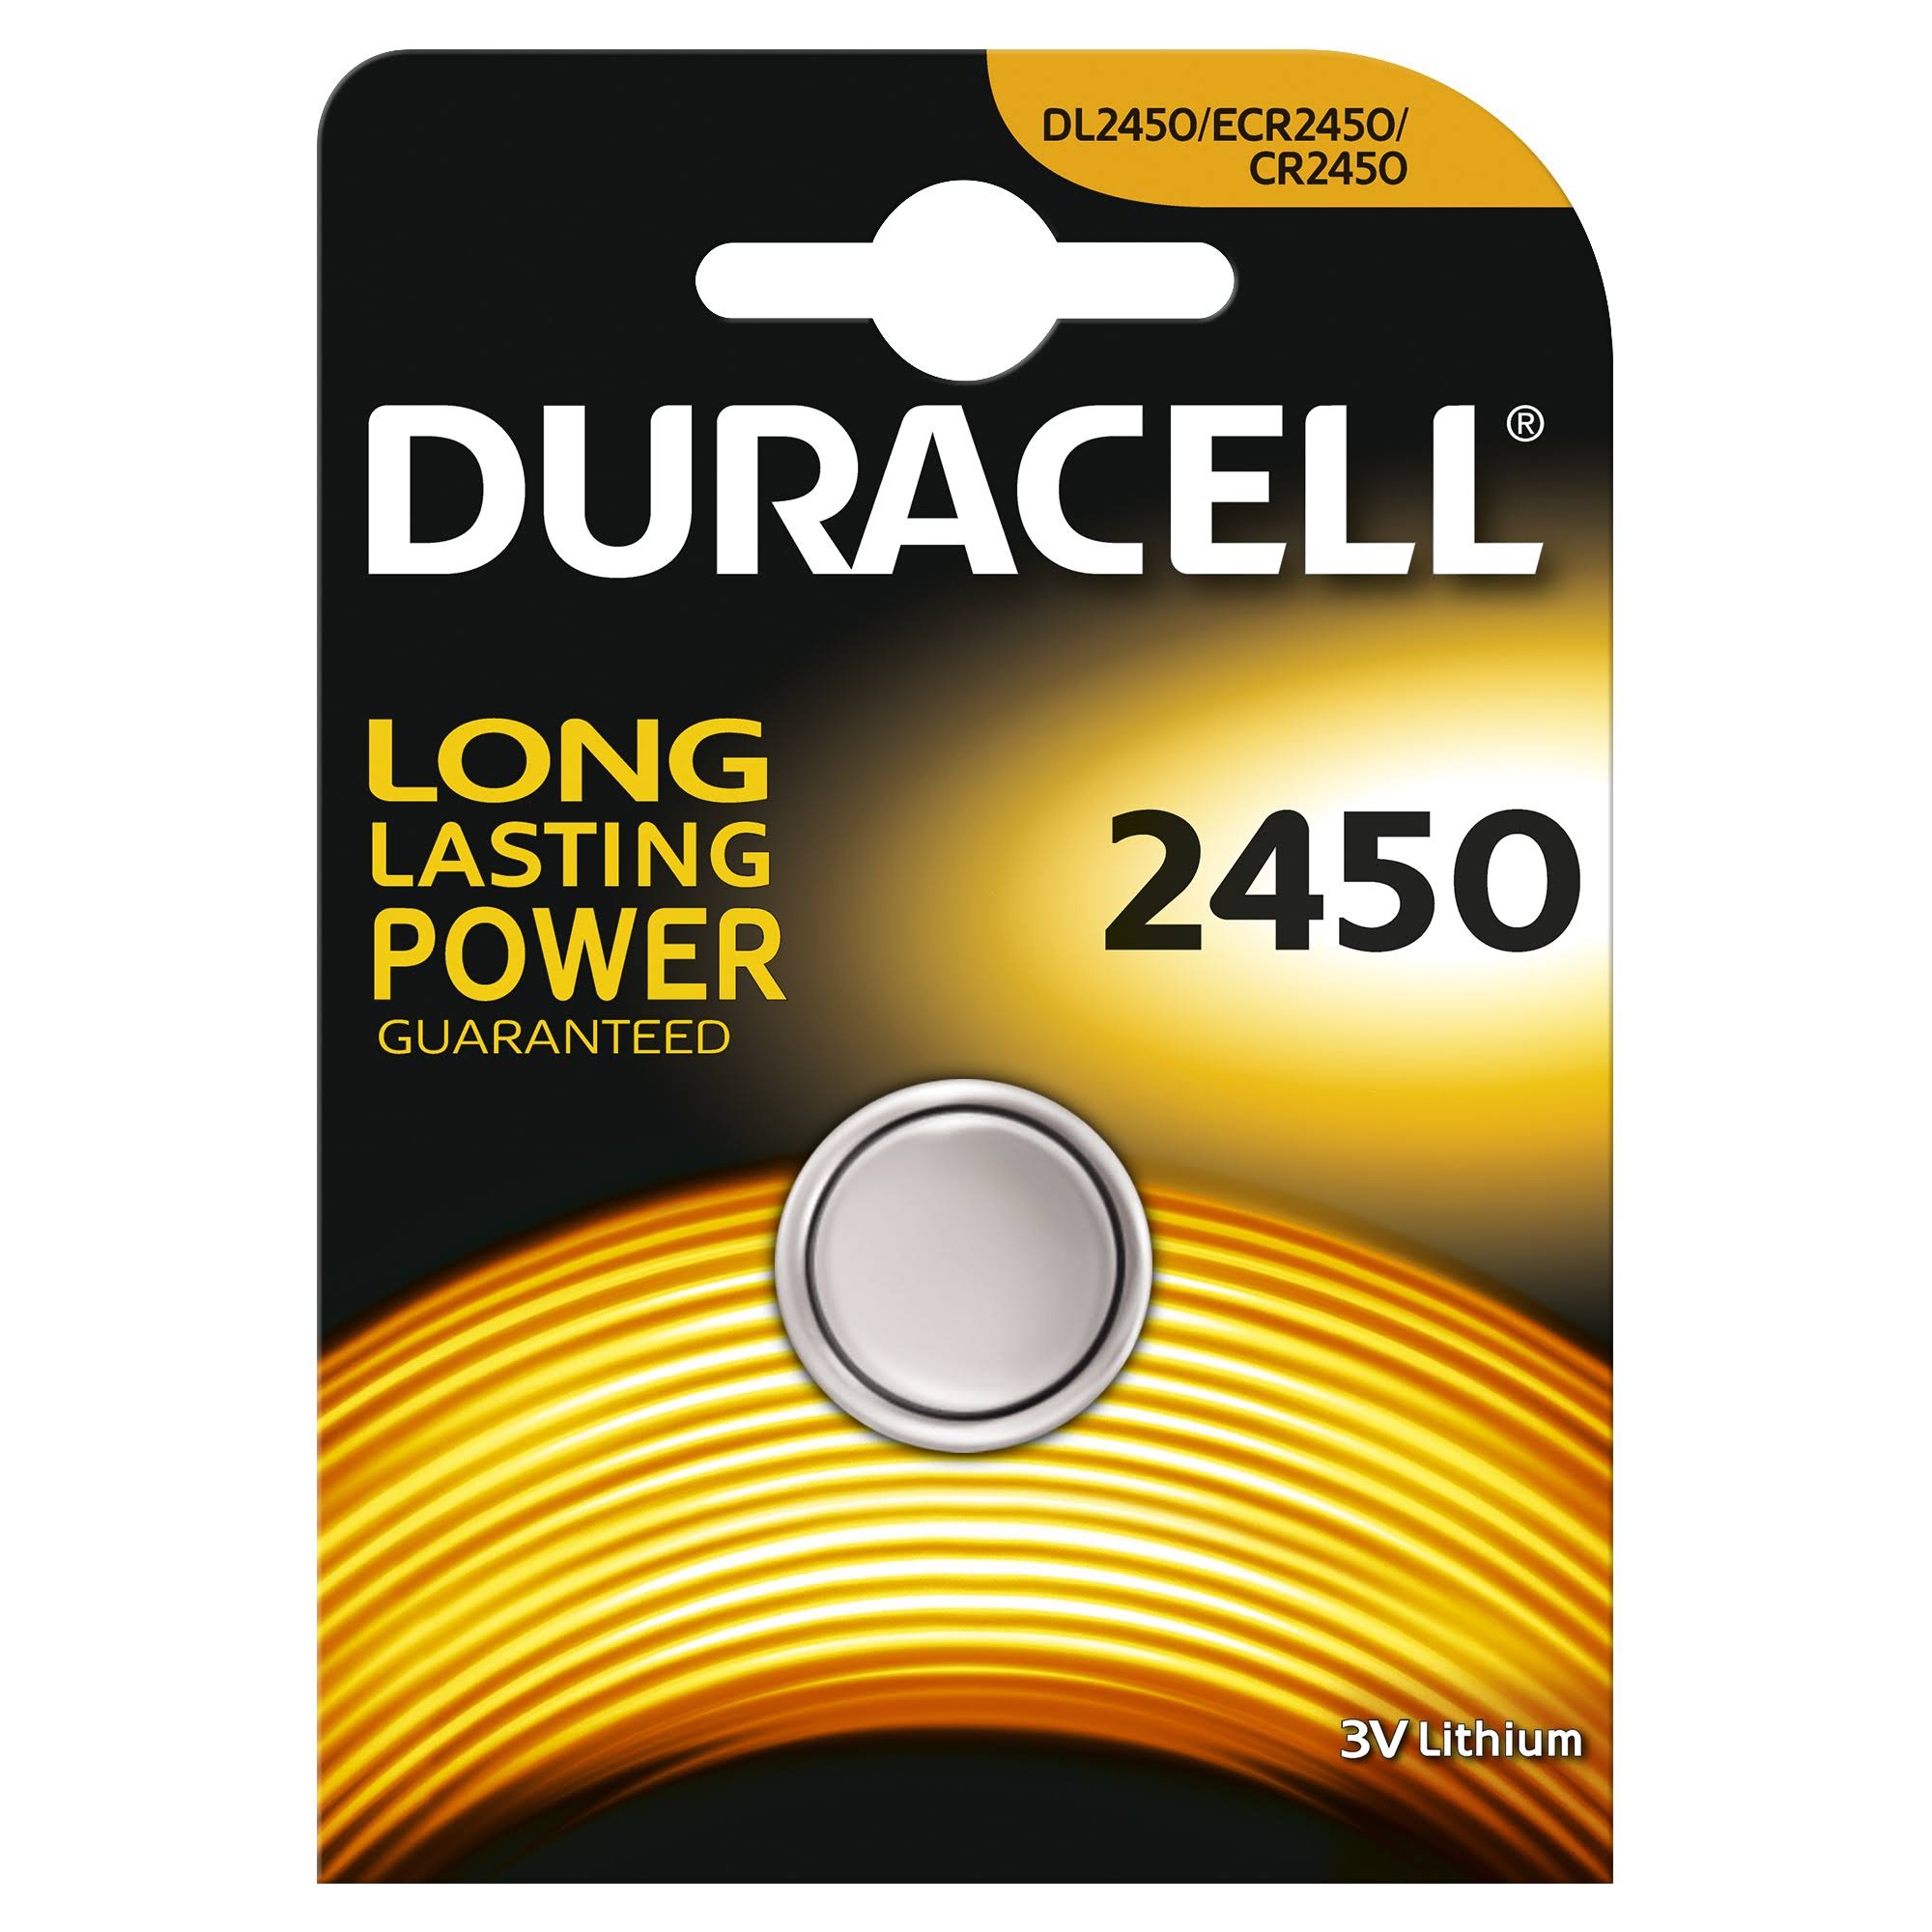 Duracell CR2450 Lithium Coin Cell Battery - 3V